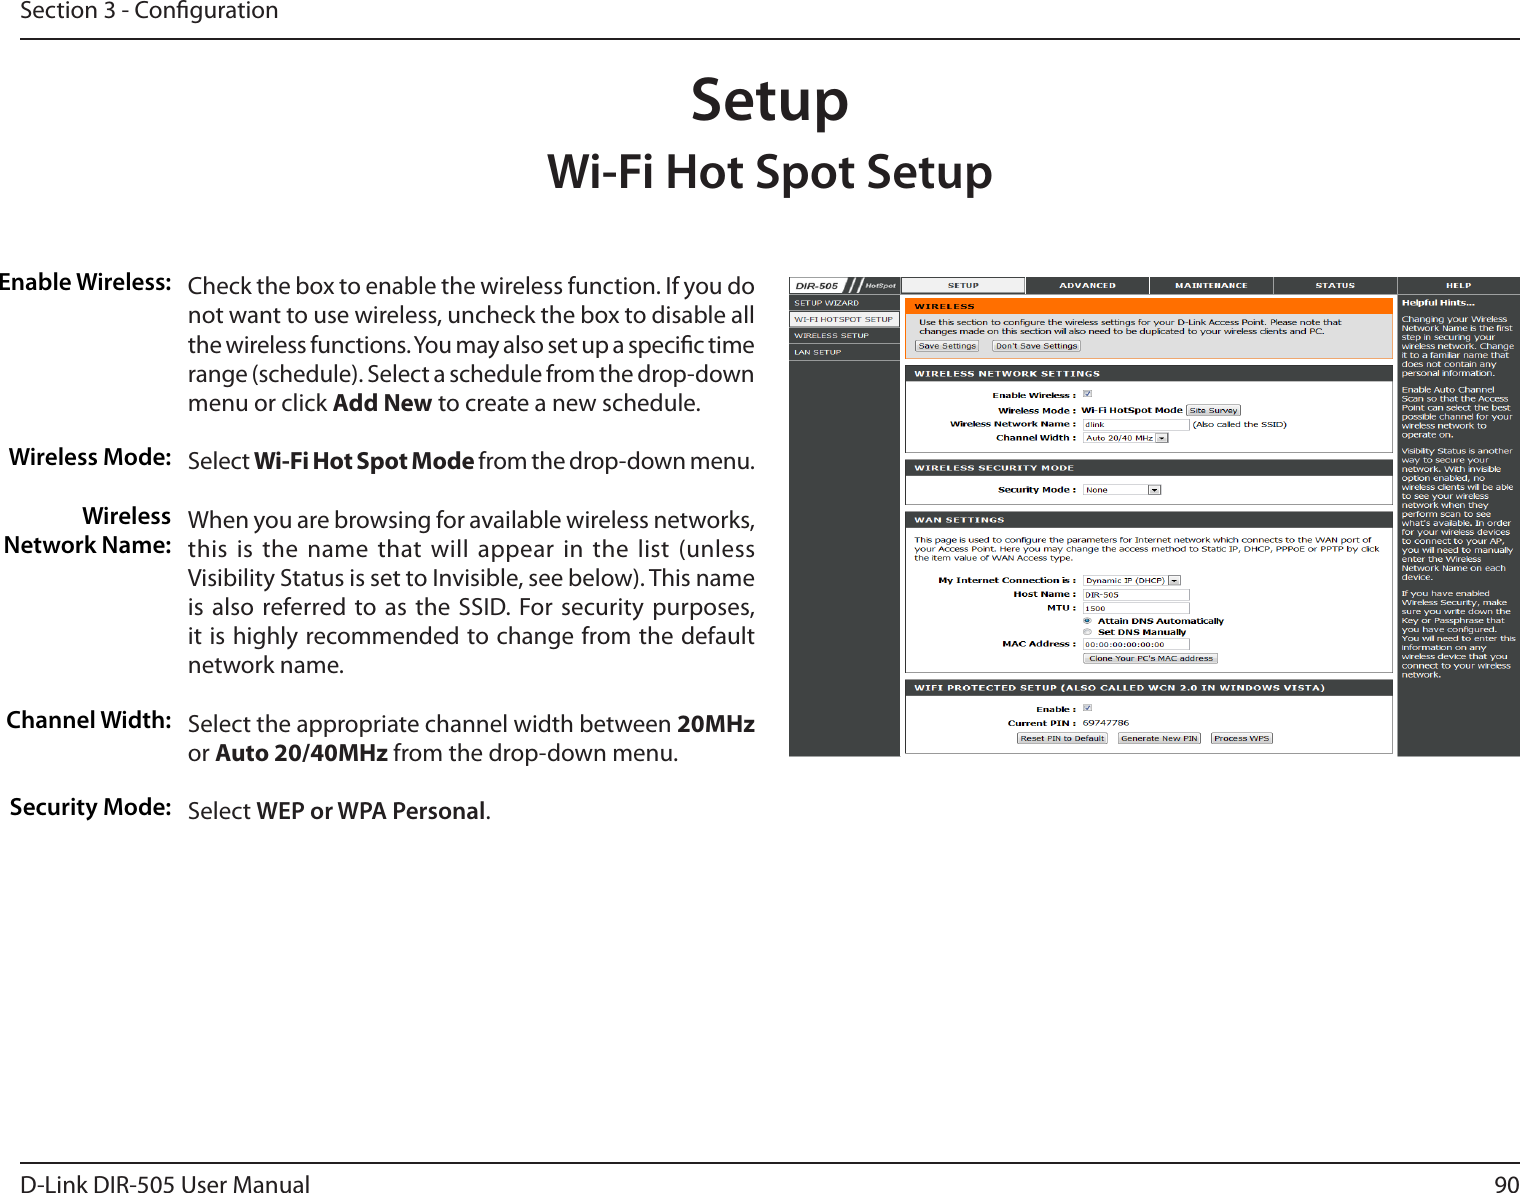 90D-Link DIR-505 User ManualSection 3 - CongurationSetupWi-Fi Hot Spot SetupEnable Wireless:Wireless Mode:Wireless Network Name:Channel Width:Security Mode:Check the box to enable the wireless function. If you do not want to use wireless, uncheck the box to disable all the wireless functions. You may also set up a specic time range (schedule). Select a schedule from the drop-down menu or click Add New to create a new schedule. Select Wi-Fi Hot Spot Mode from the drop-down menu.When you are browsing for available wireless networks, this is  the name  that will  appear in the list (unless Visibility Status is set to Invisible, see below). This name is  also  referred to as the  SSID. For  security  purposes, it is highly recommended to change from the default network name.Select the appropriate channel width between 20MHz or Auto 20/40MHz from the drop-down menu. Select WEP or WPA Personal. 